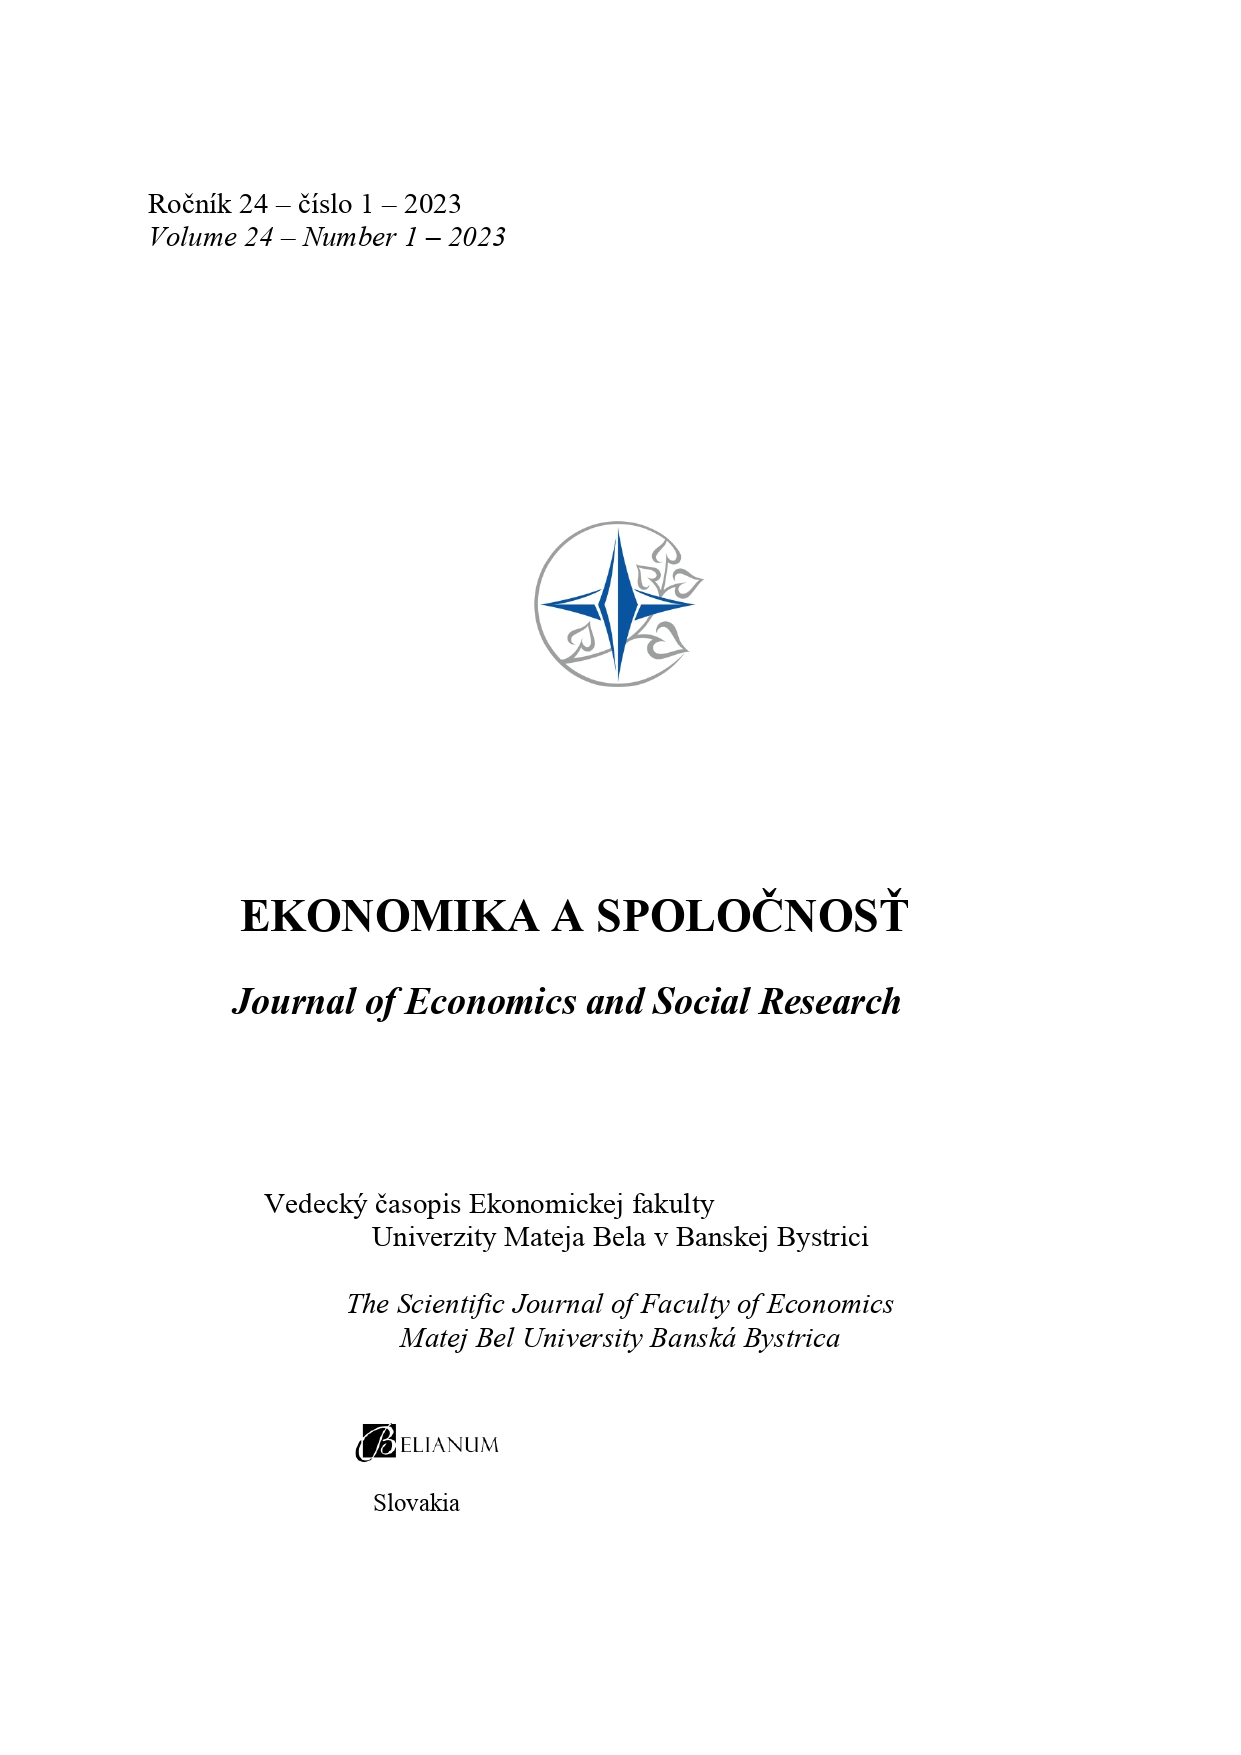 Did the Corona crisis change incomes and employment in Slovakia? Cover Image